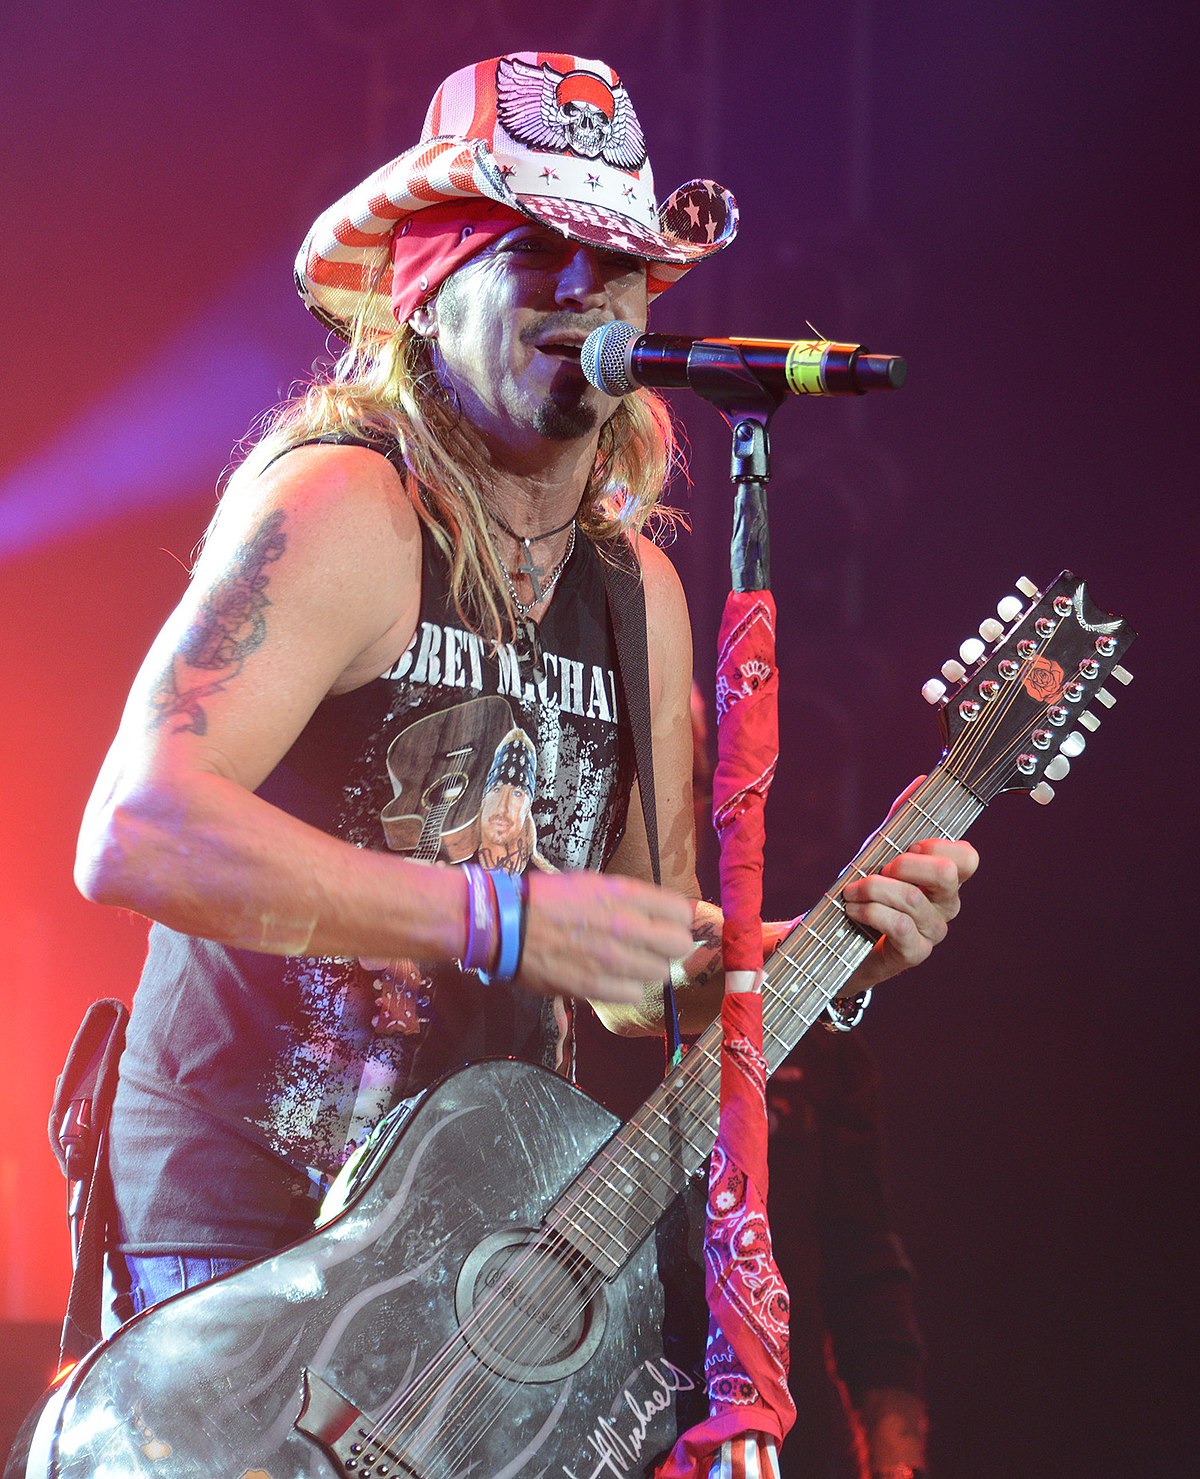 Category Bret Michaels Wikimedia Commons